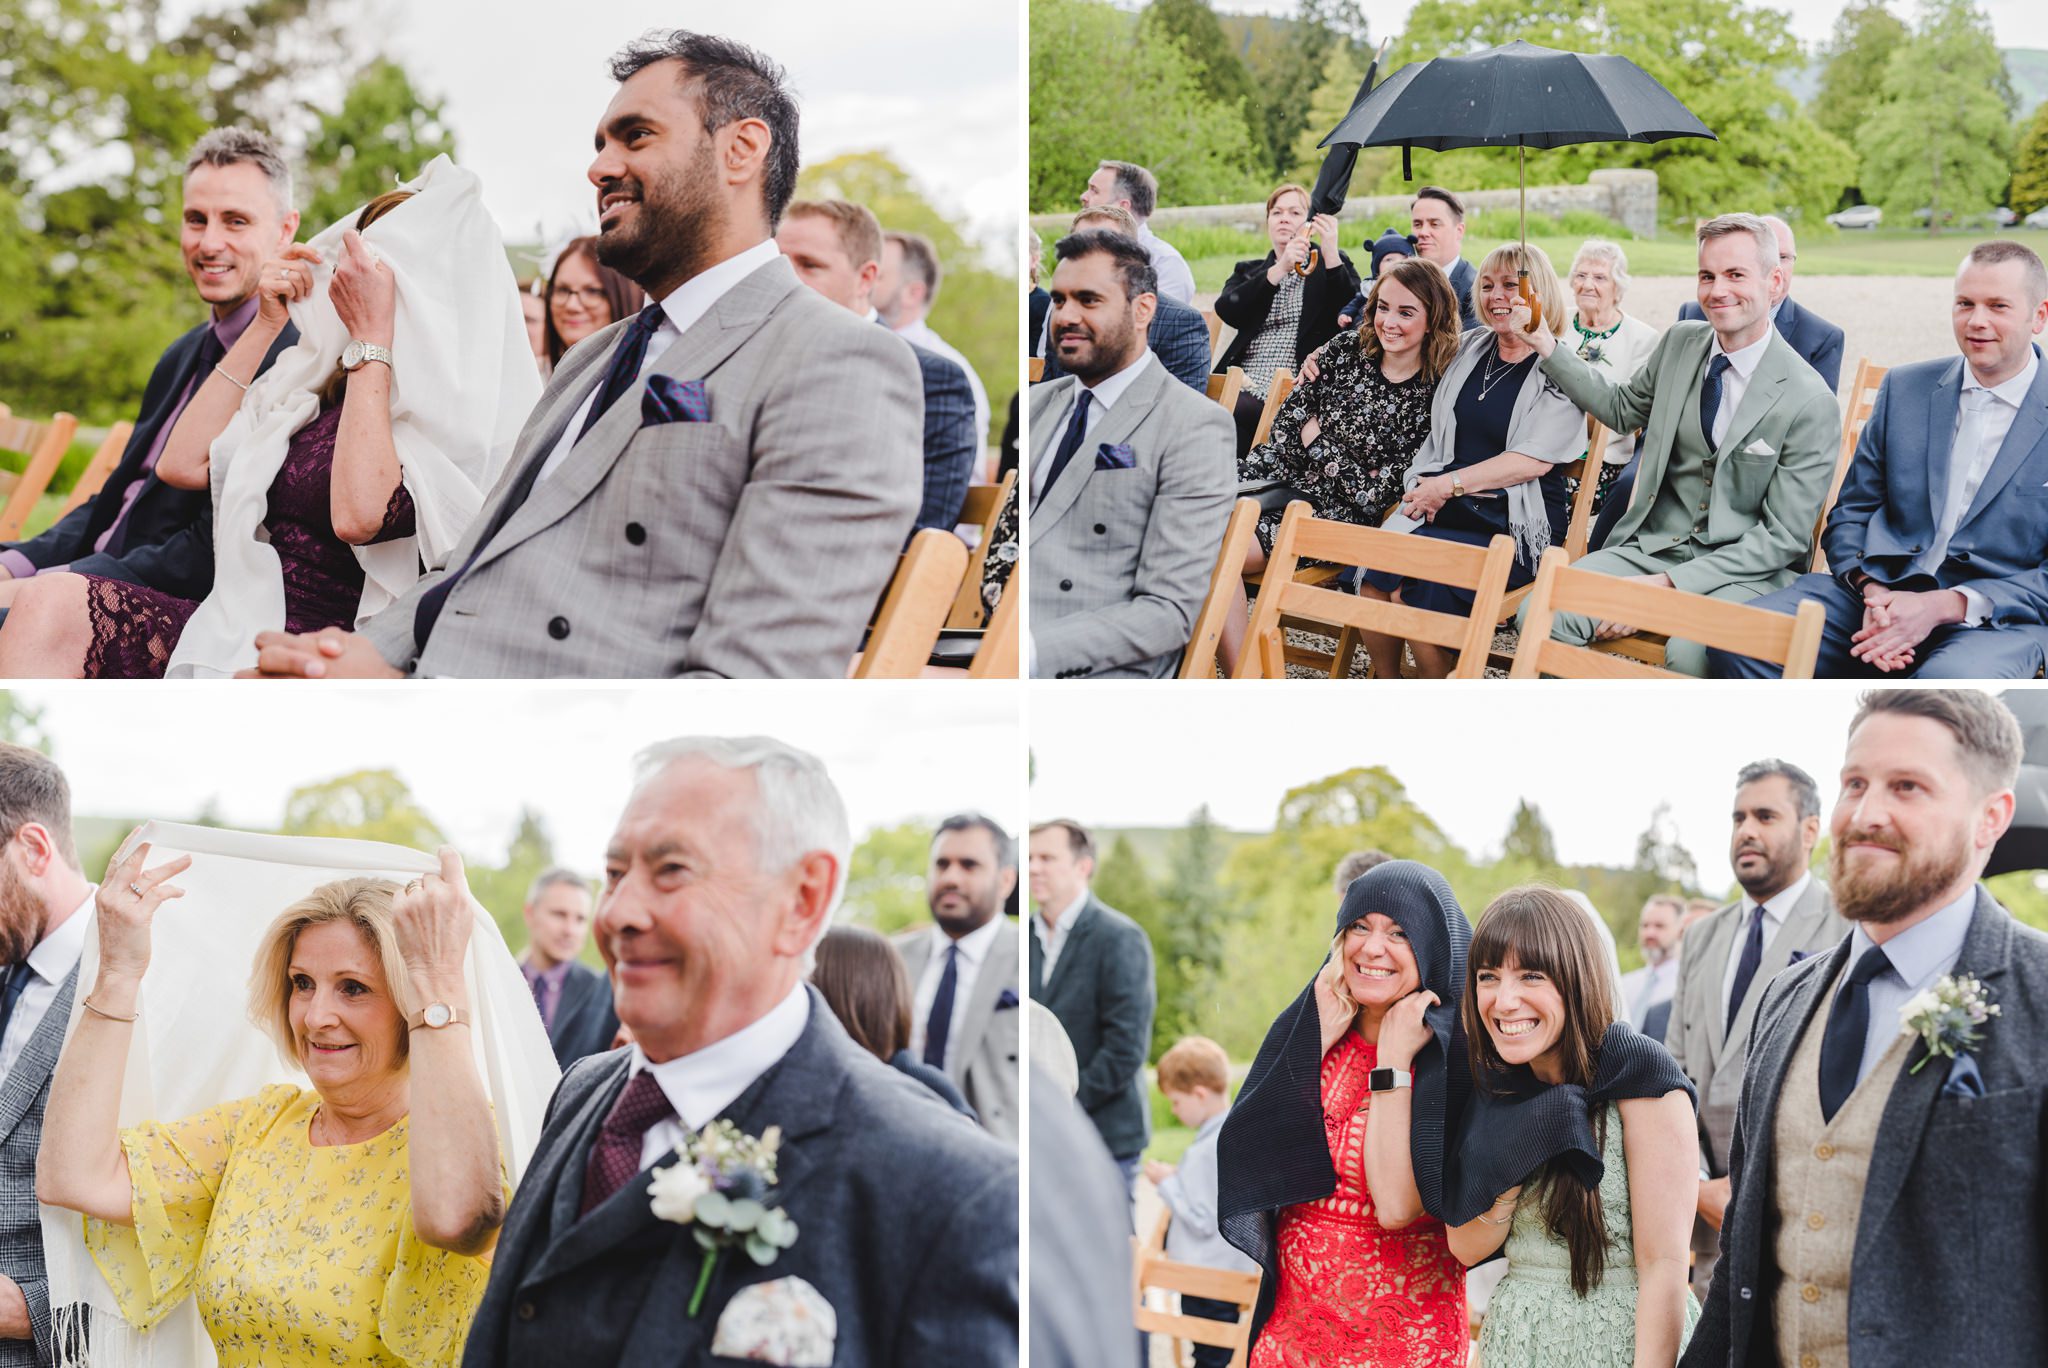 Guests getting rained on during a wedding